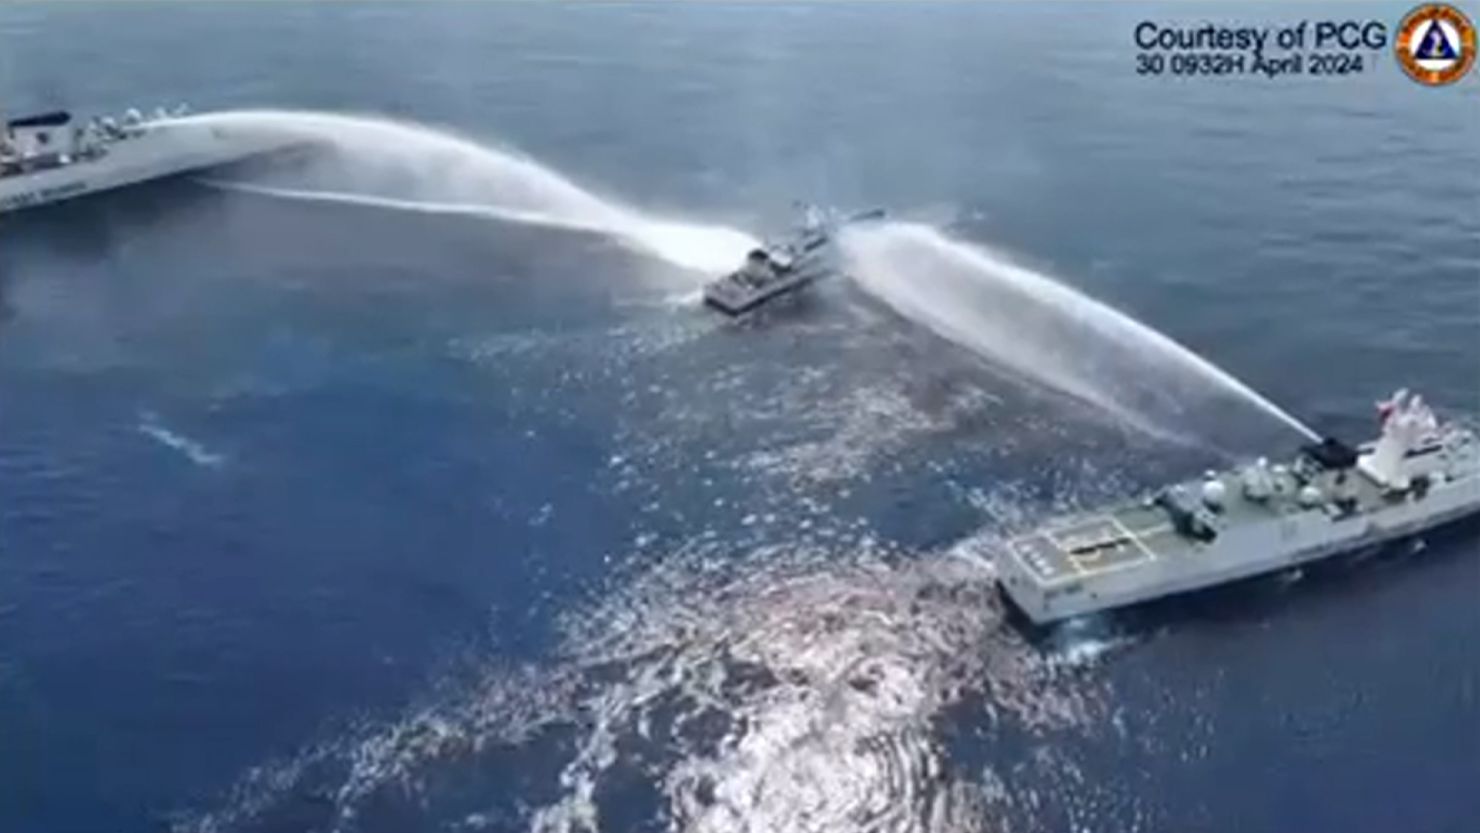 A screengrab taken from video provided by the Philippine Coast Guard shows China’s coast guard using water cannons against Philippine vessels near the Scarborough Shoal on Tuesday, April 30.